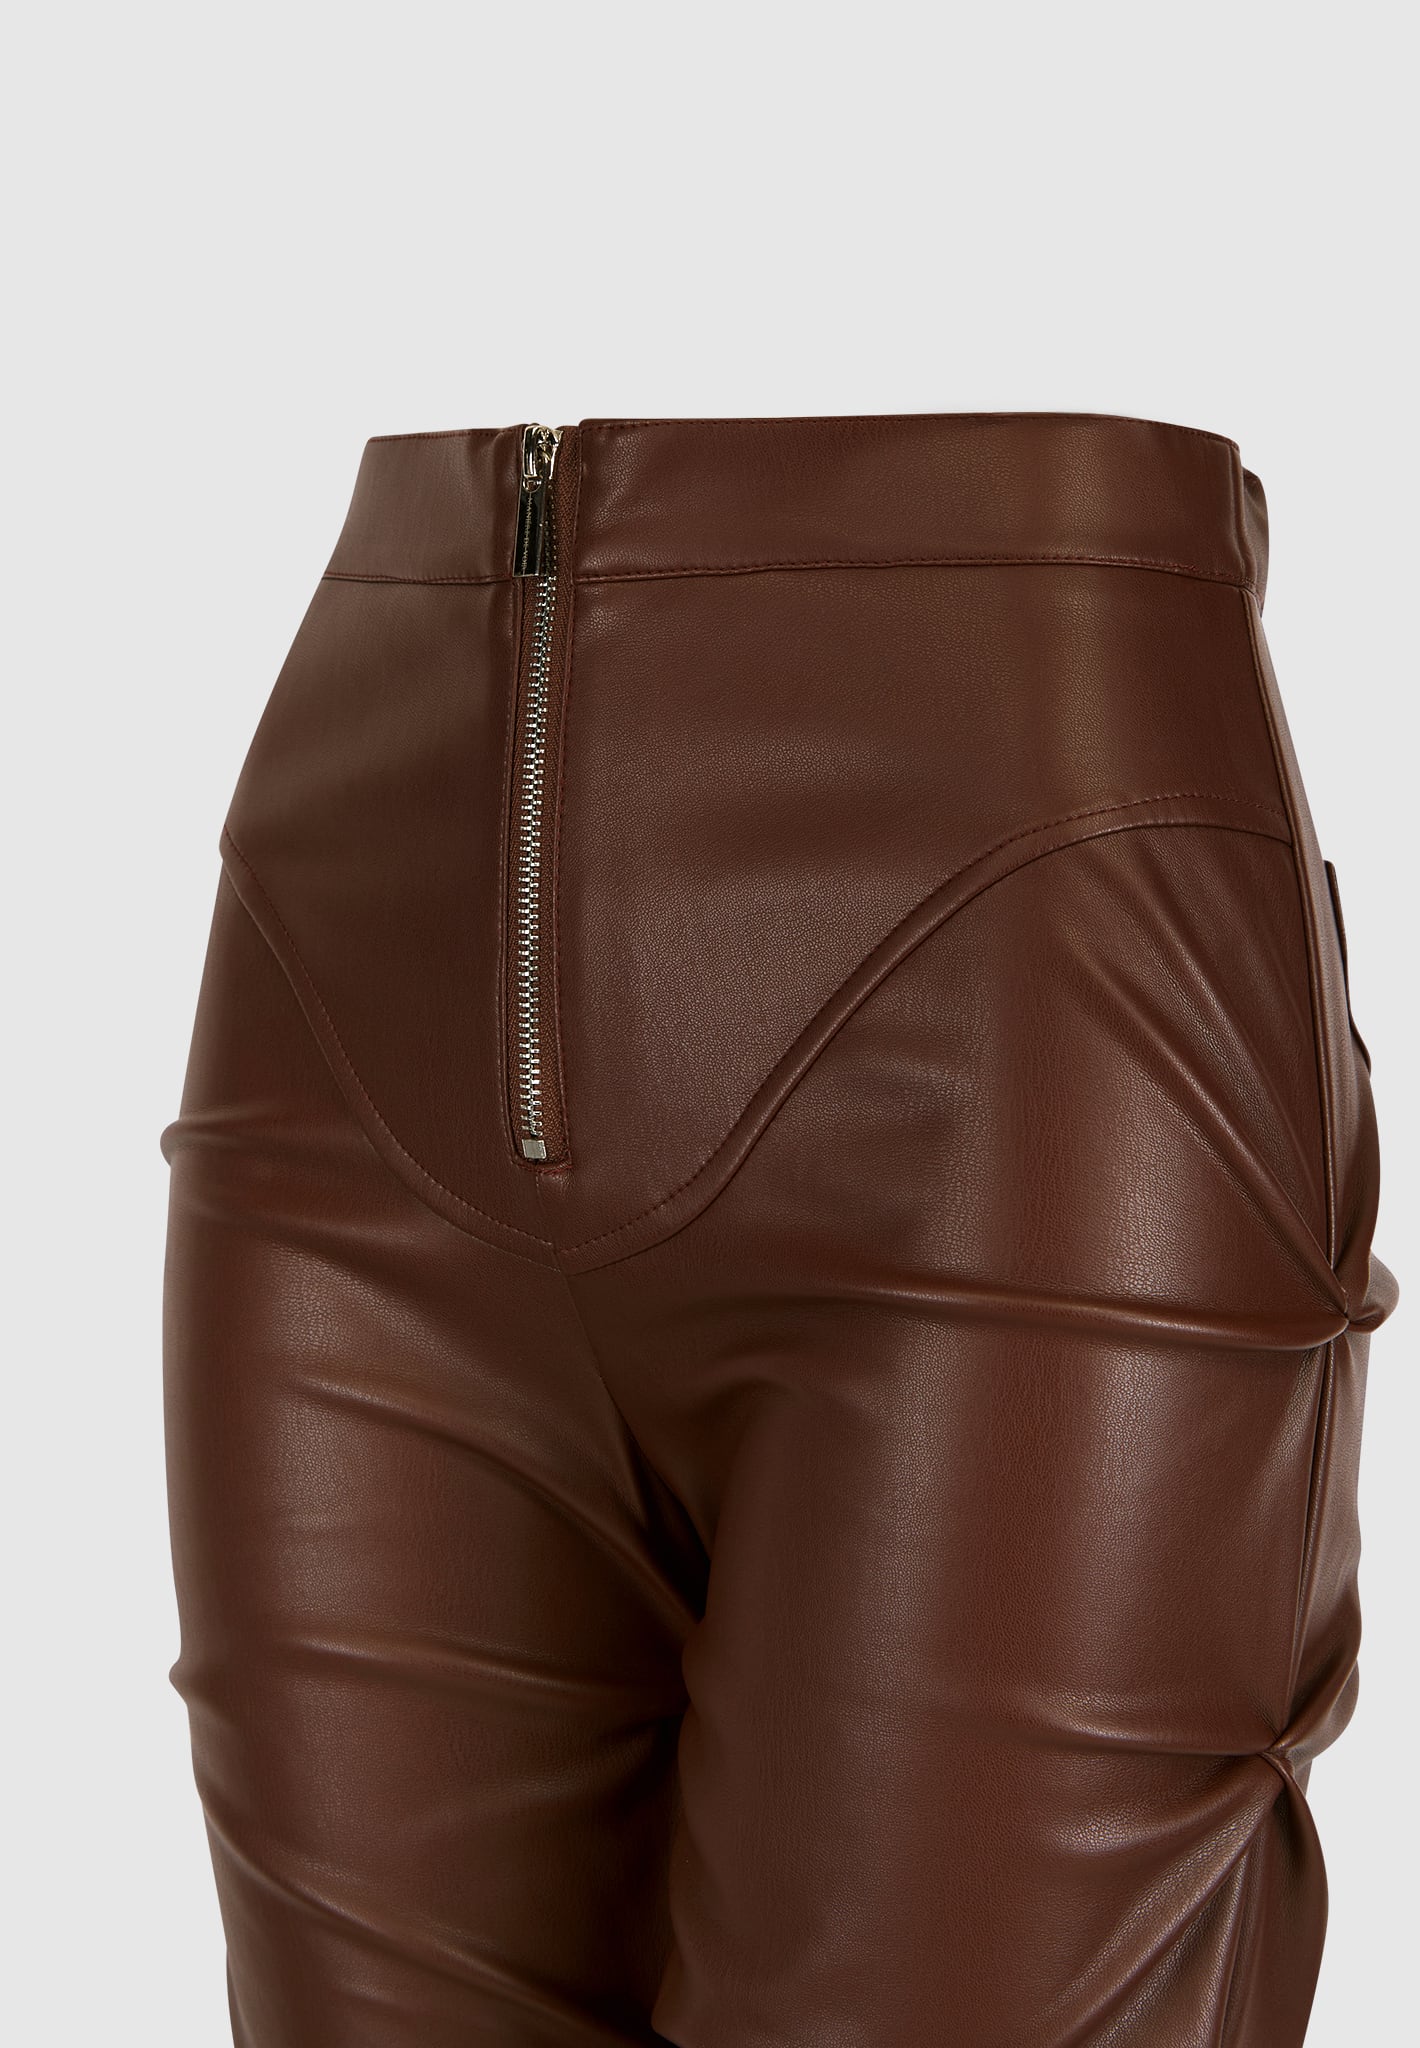 Chocolate Faux Leather Lace Up Flared Pants